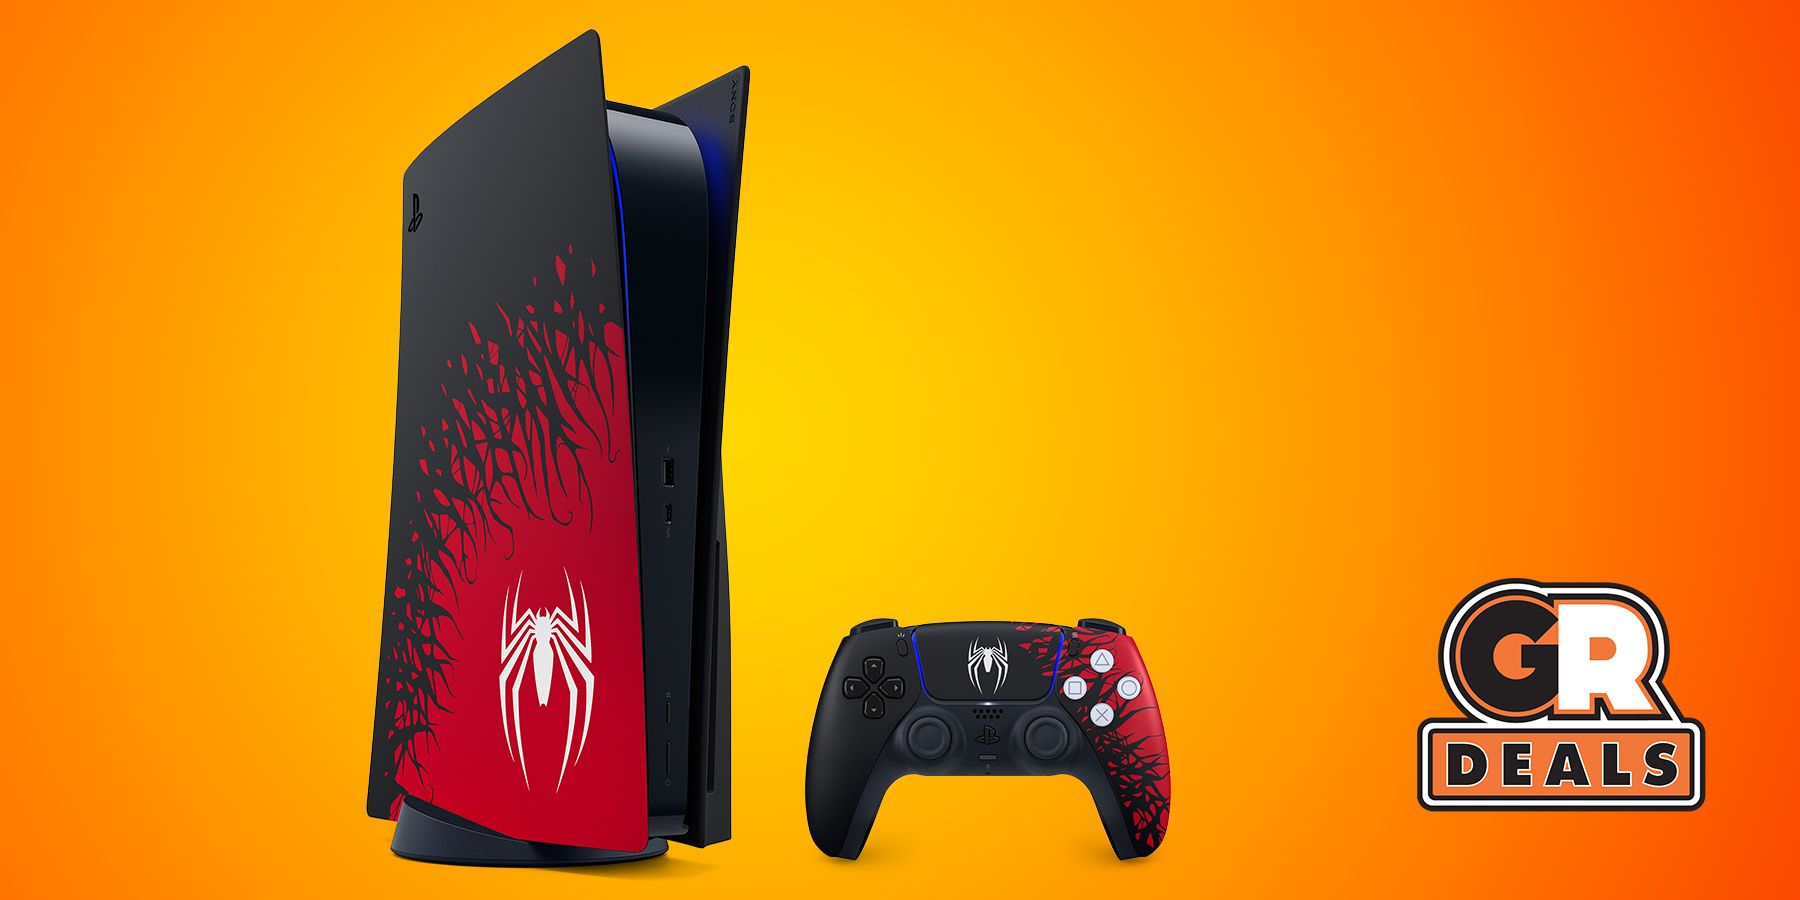 The PS5 Spiderman Edition Console is Still Available on Amazon While Supplies Last